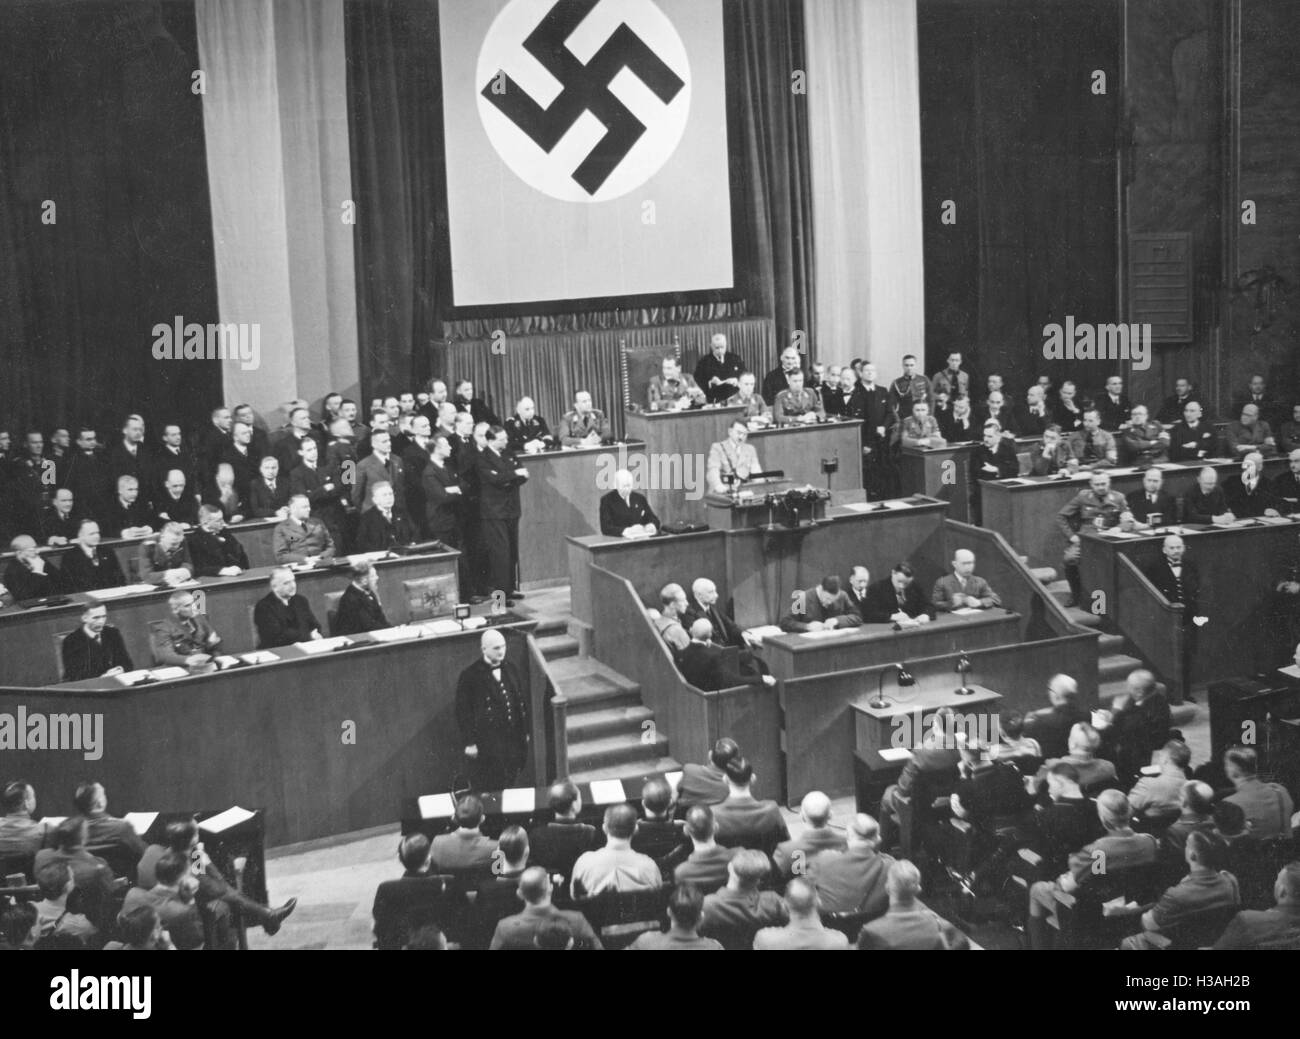 Adolf Hitler's speech before the Reichstag in the Kroll Opera House in Berlin, 1933 Stock Photo